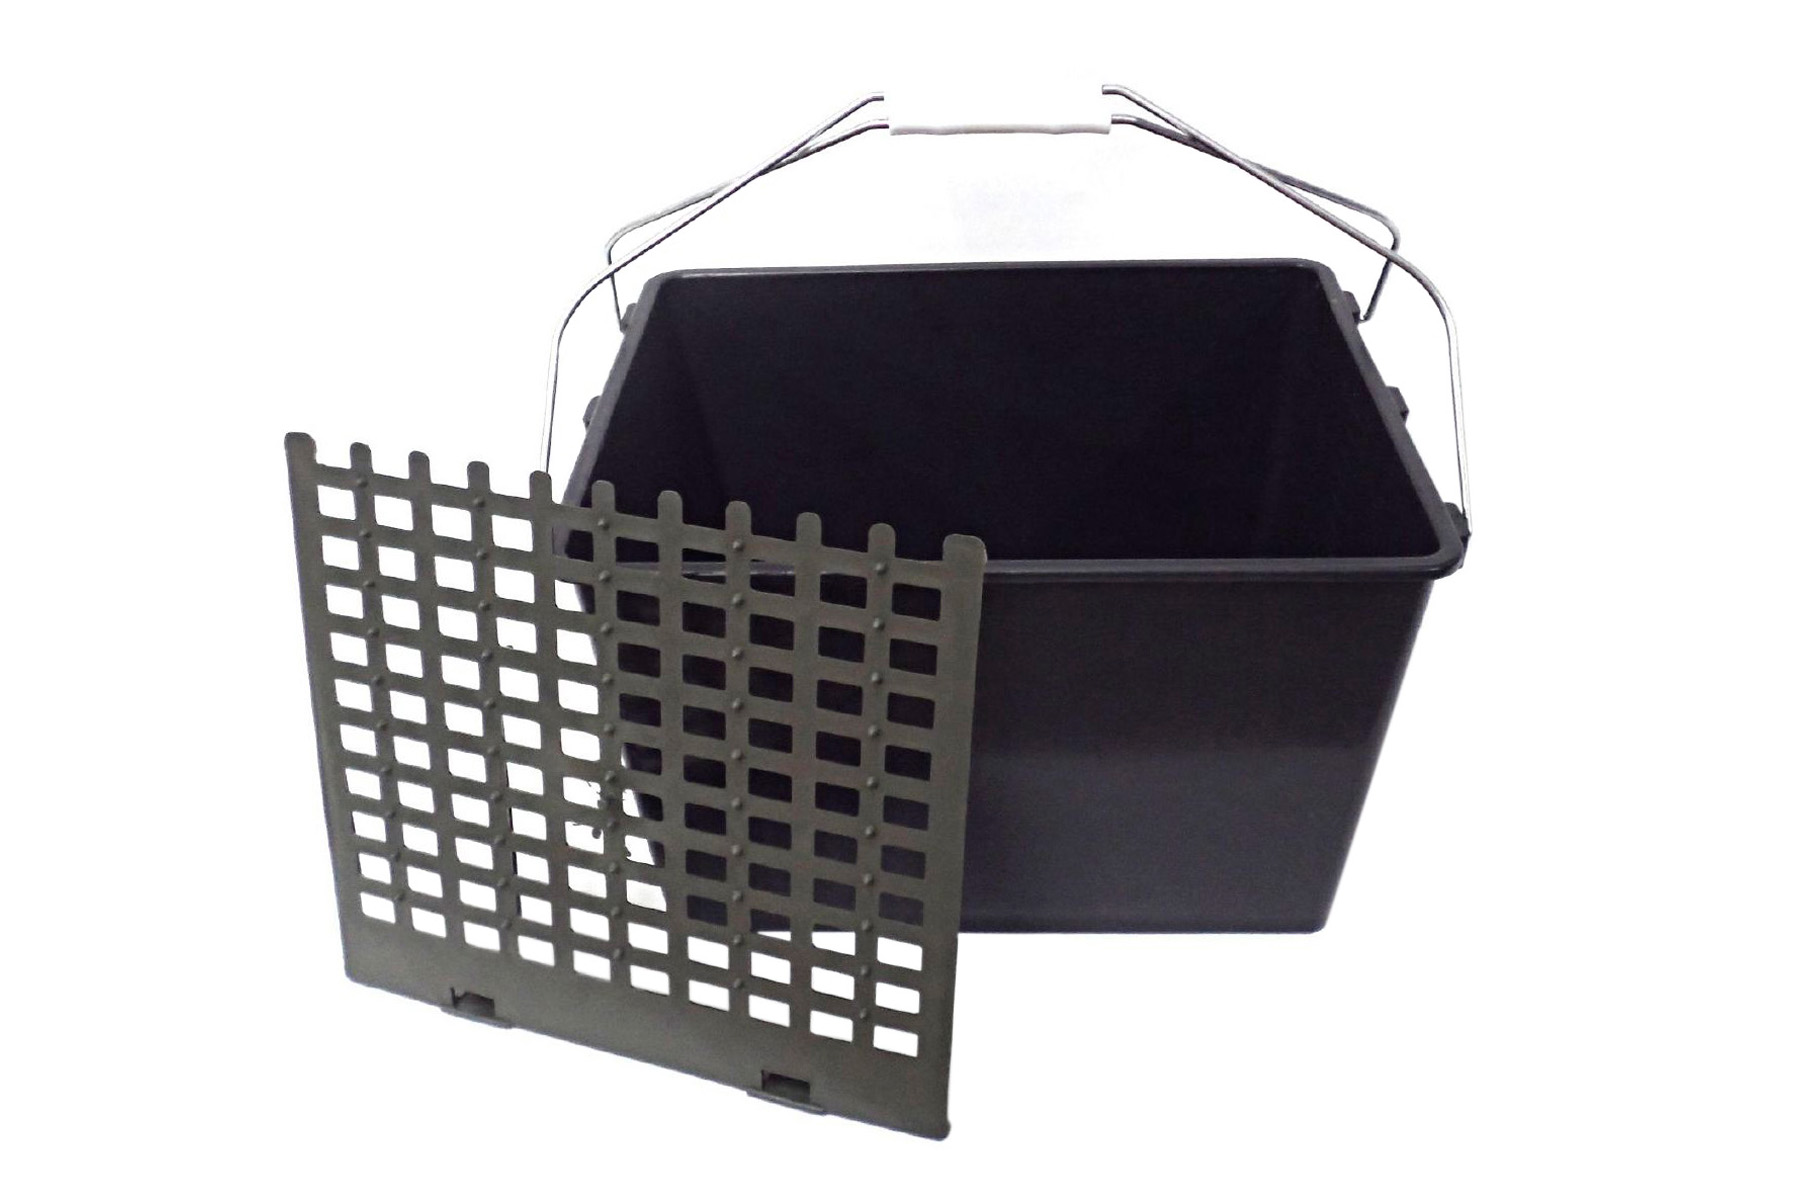 PAINT BUCKET WITH TRAY 16L COLOURS